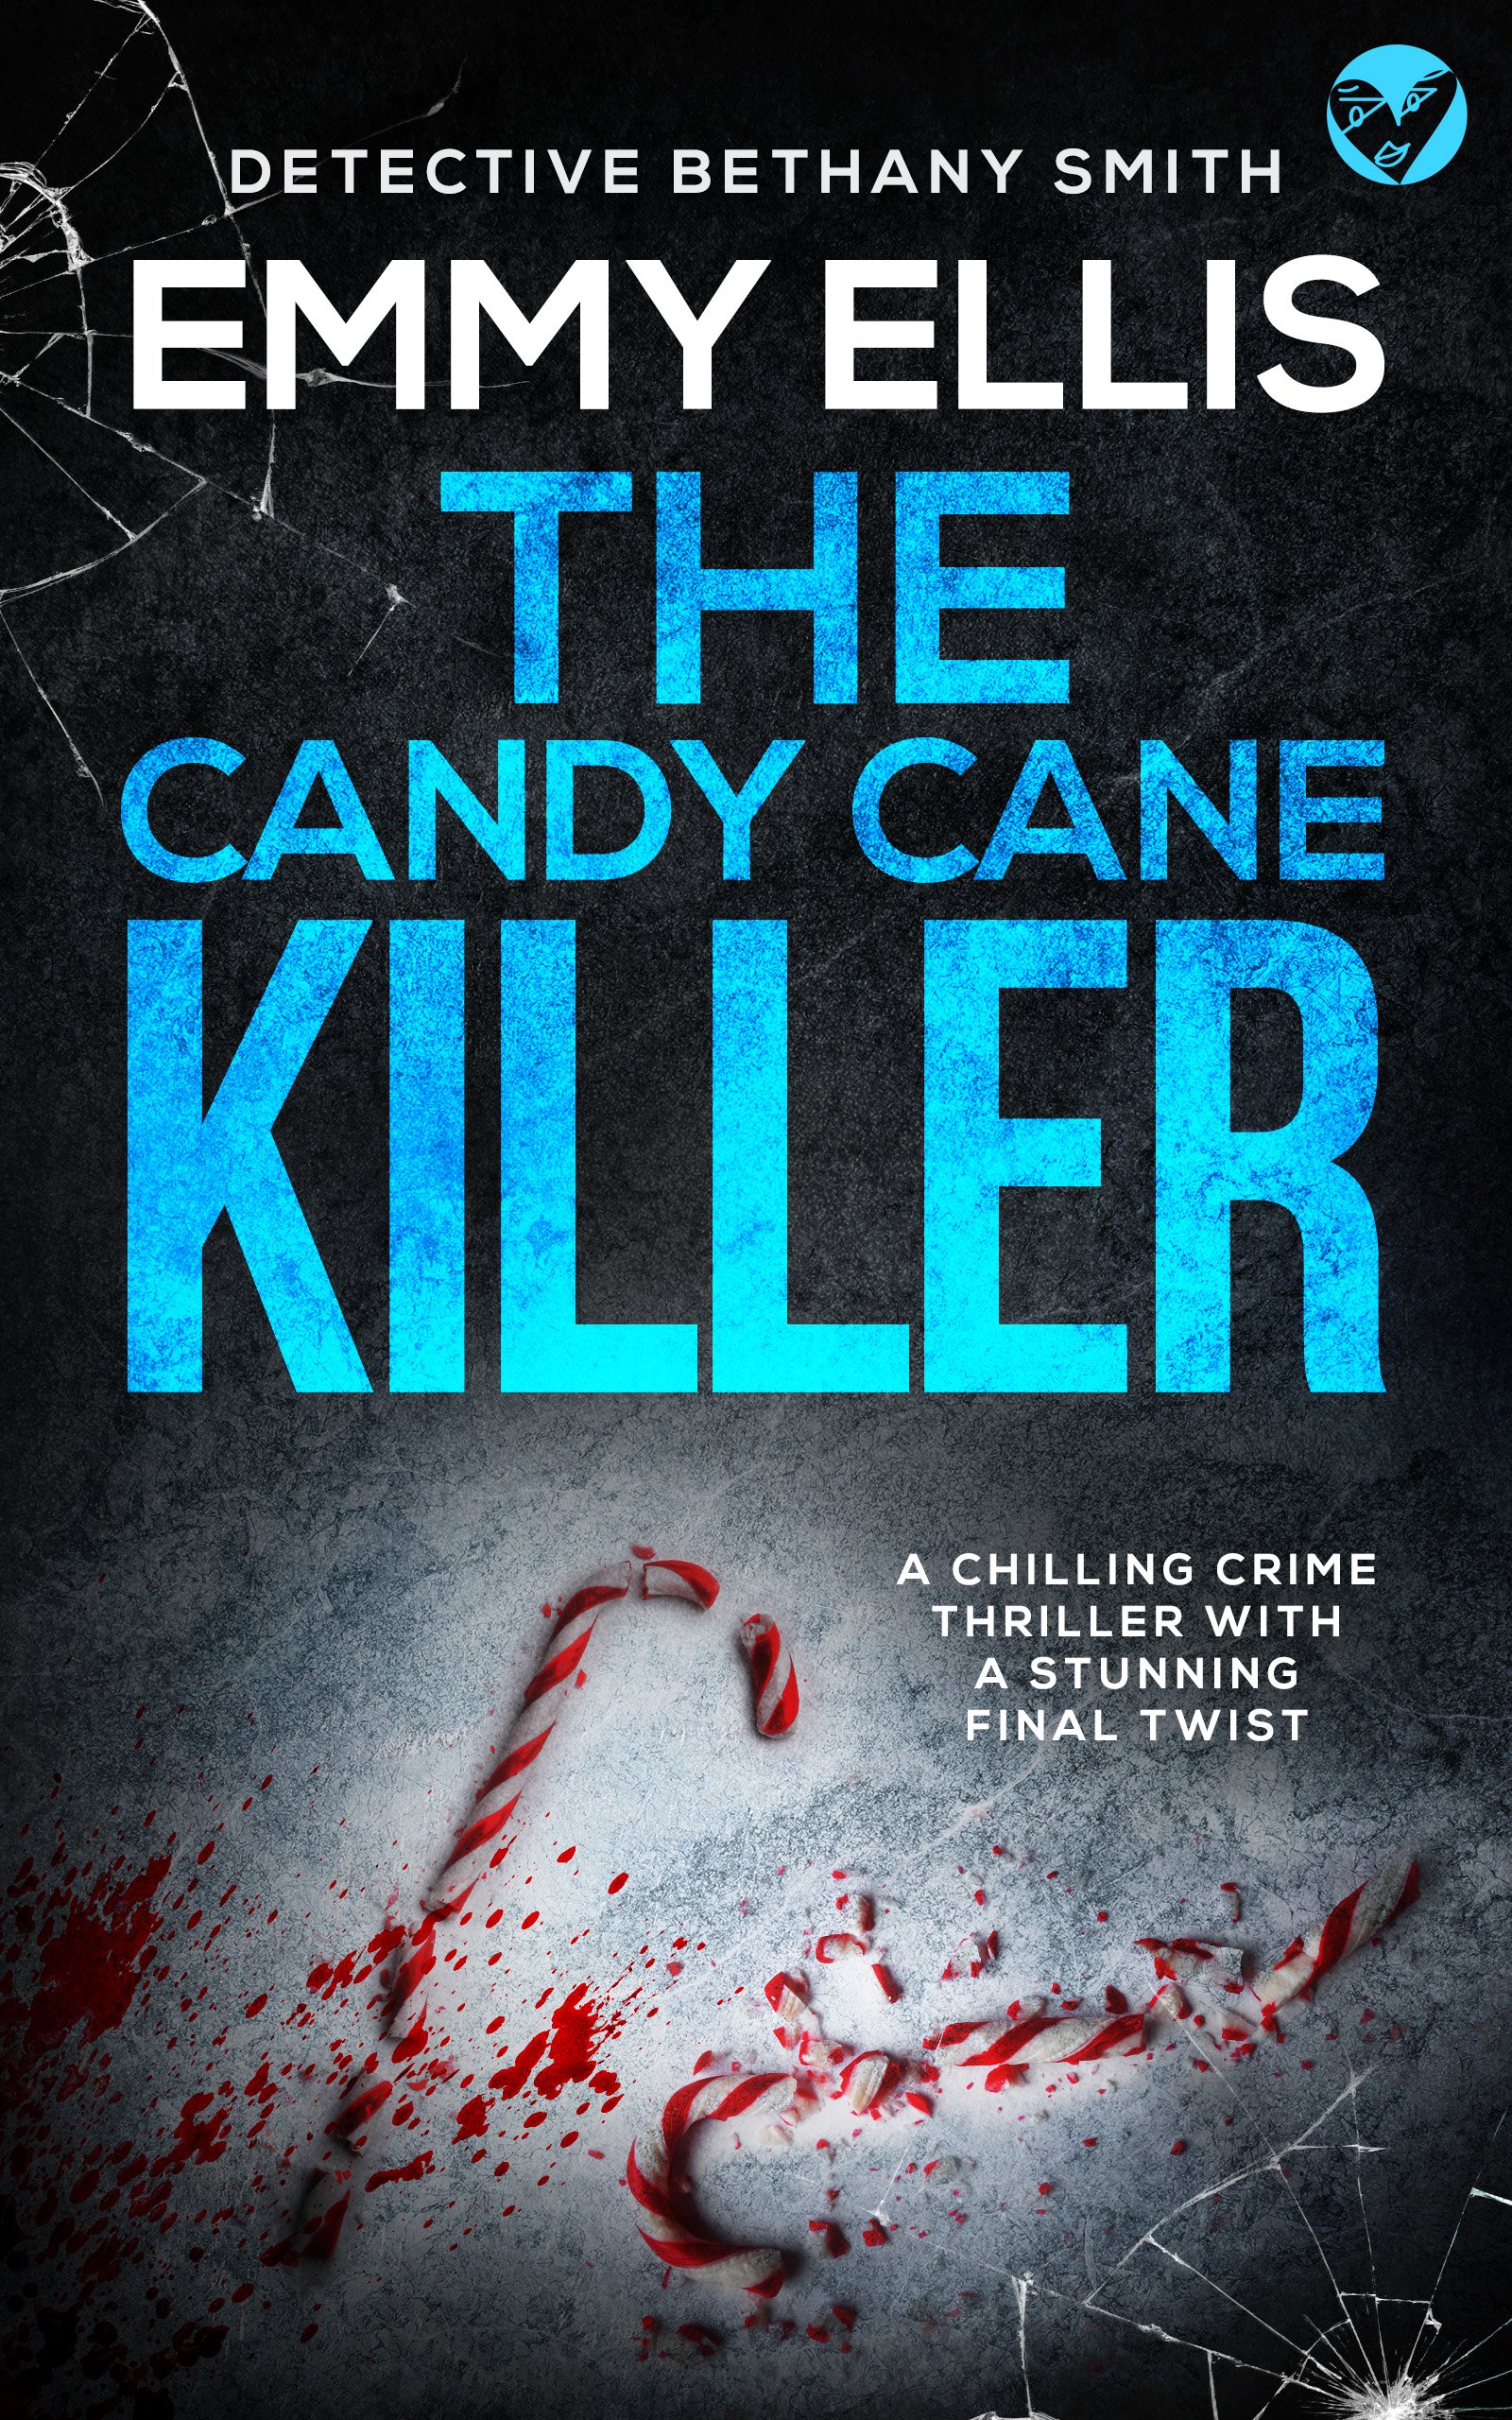 THE CANDY CANE KILLER Cover publish.jpg